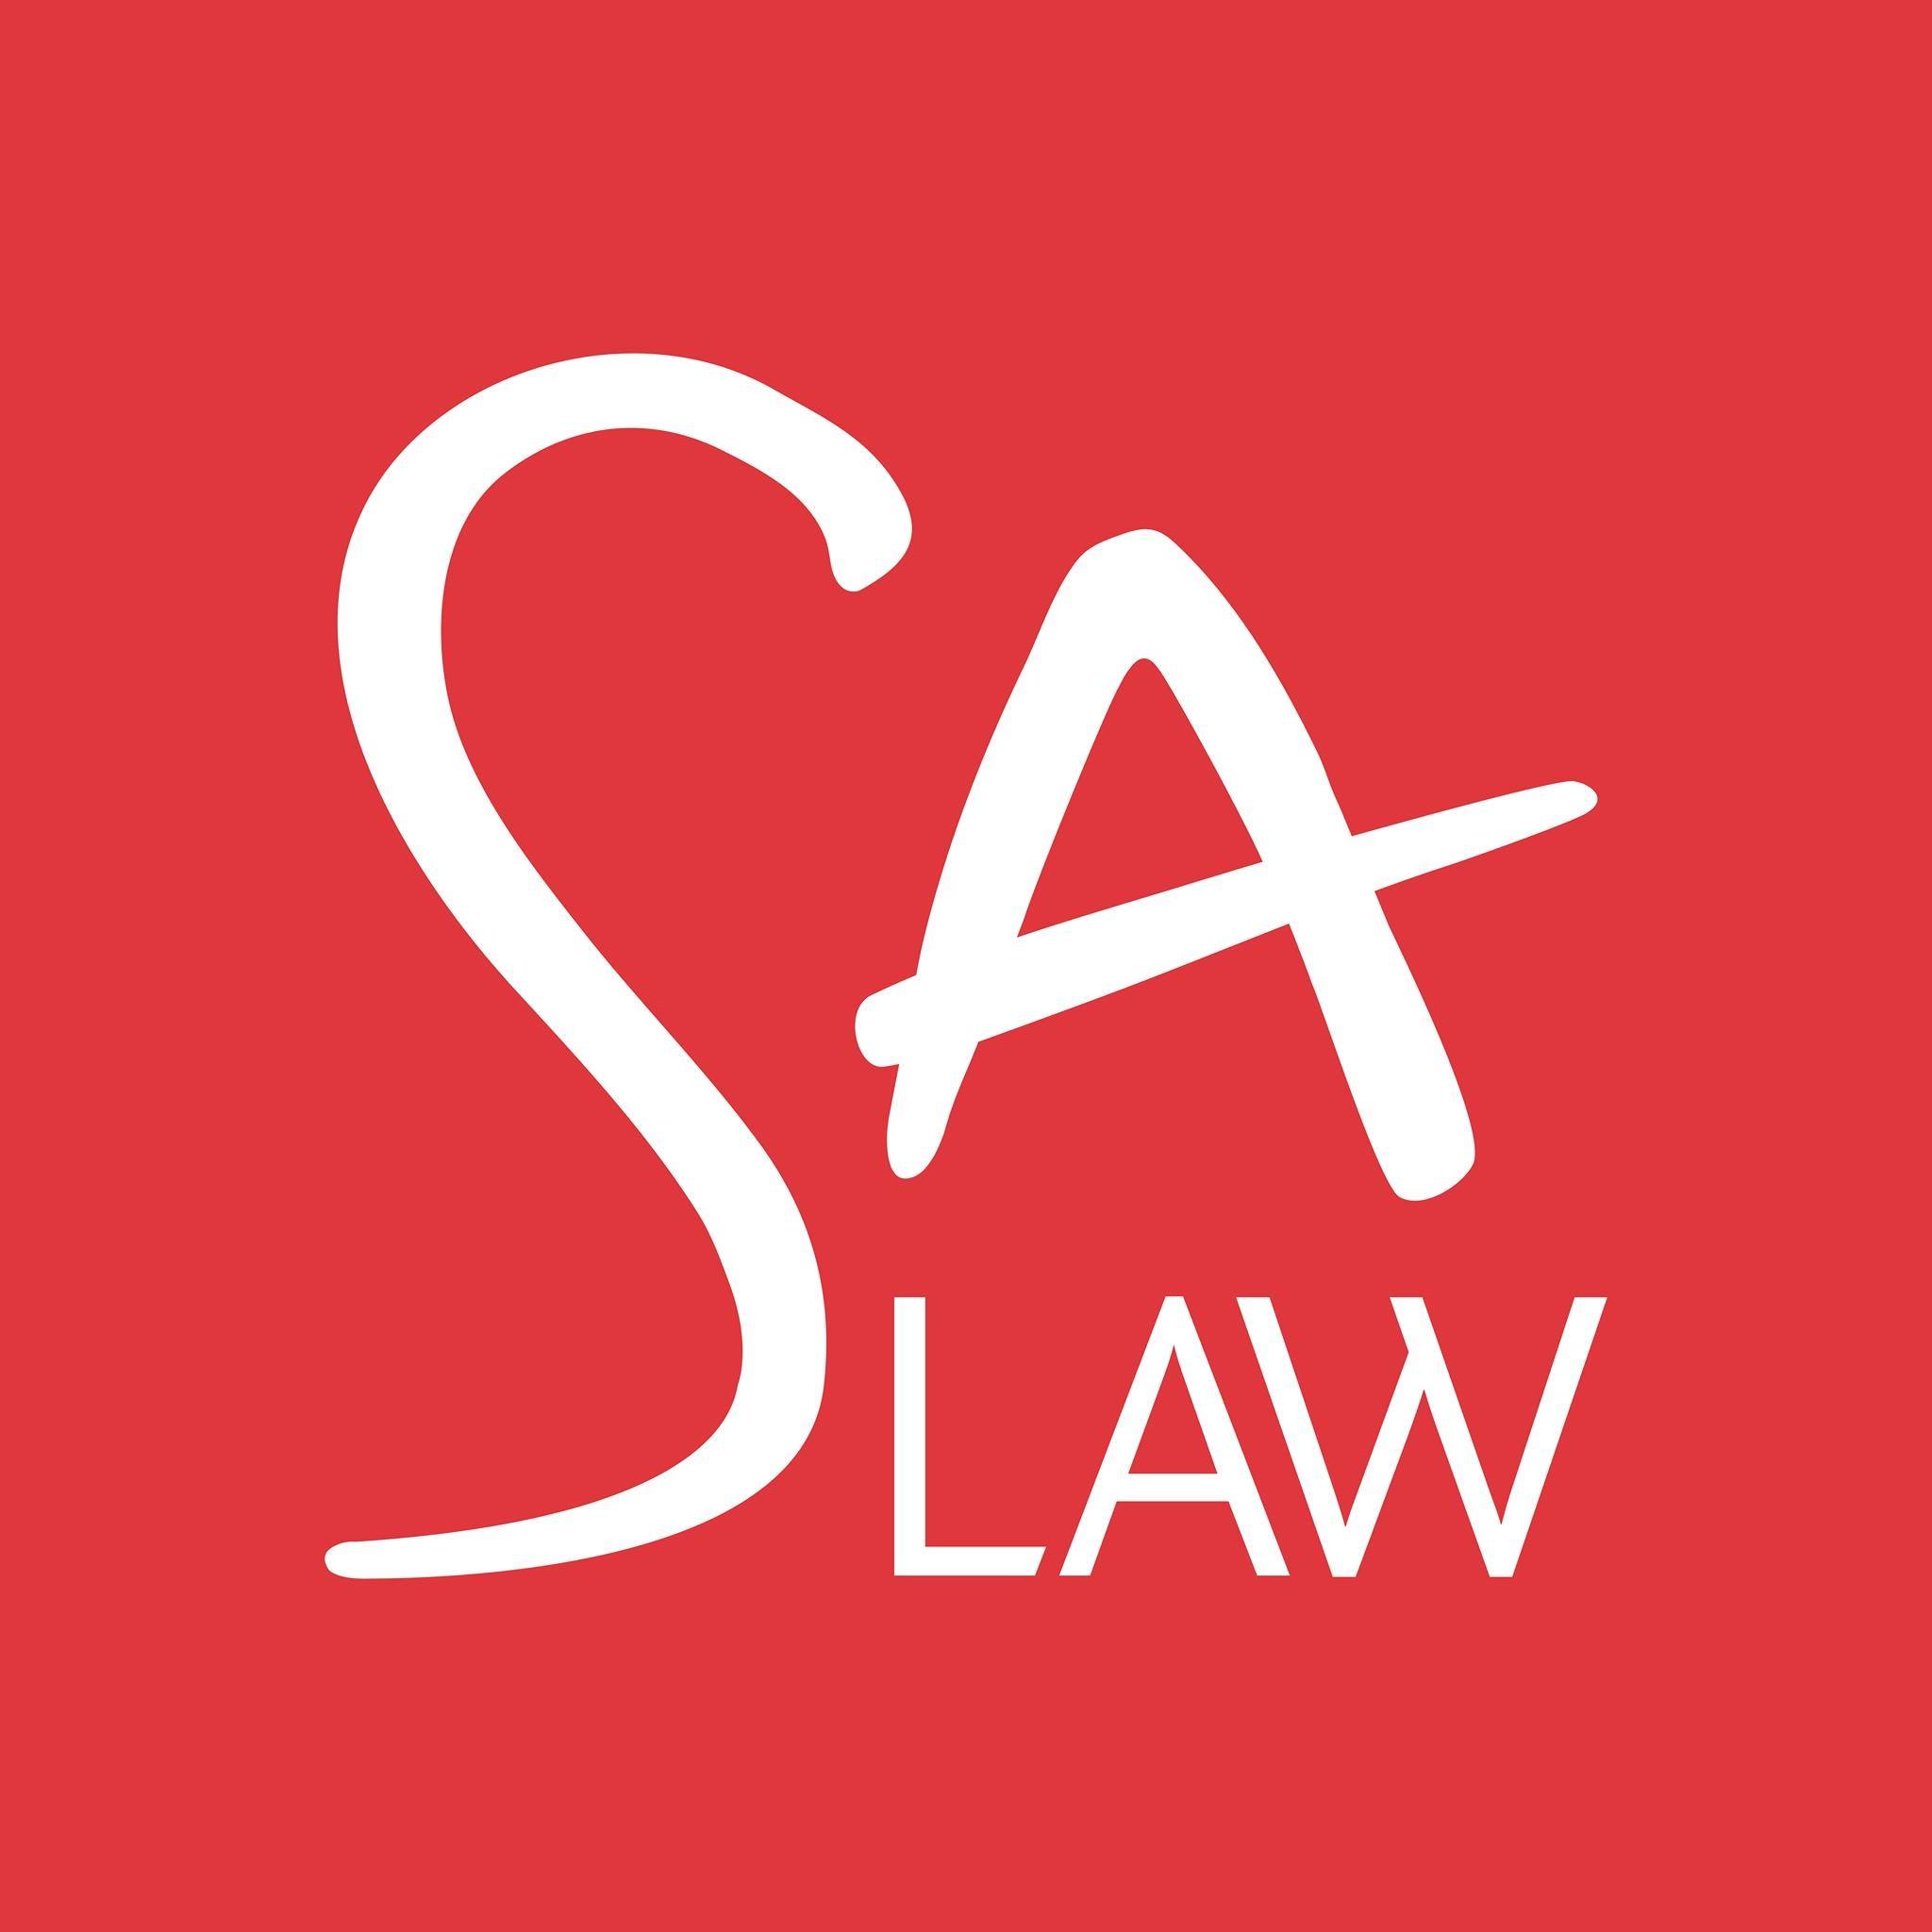 &#163;50 voucher to spend at SA LAW